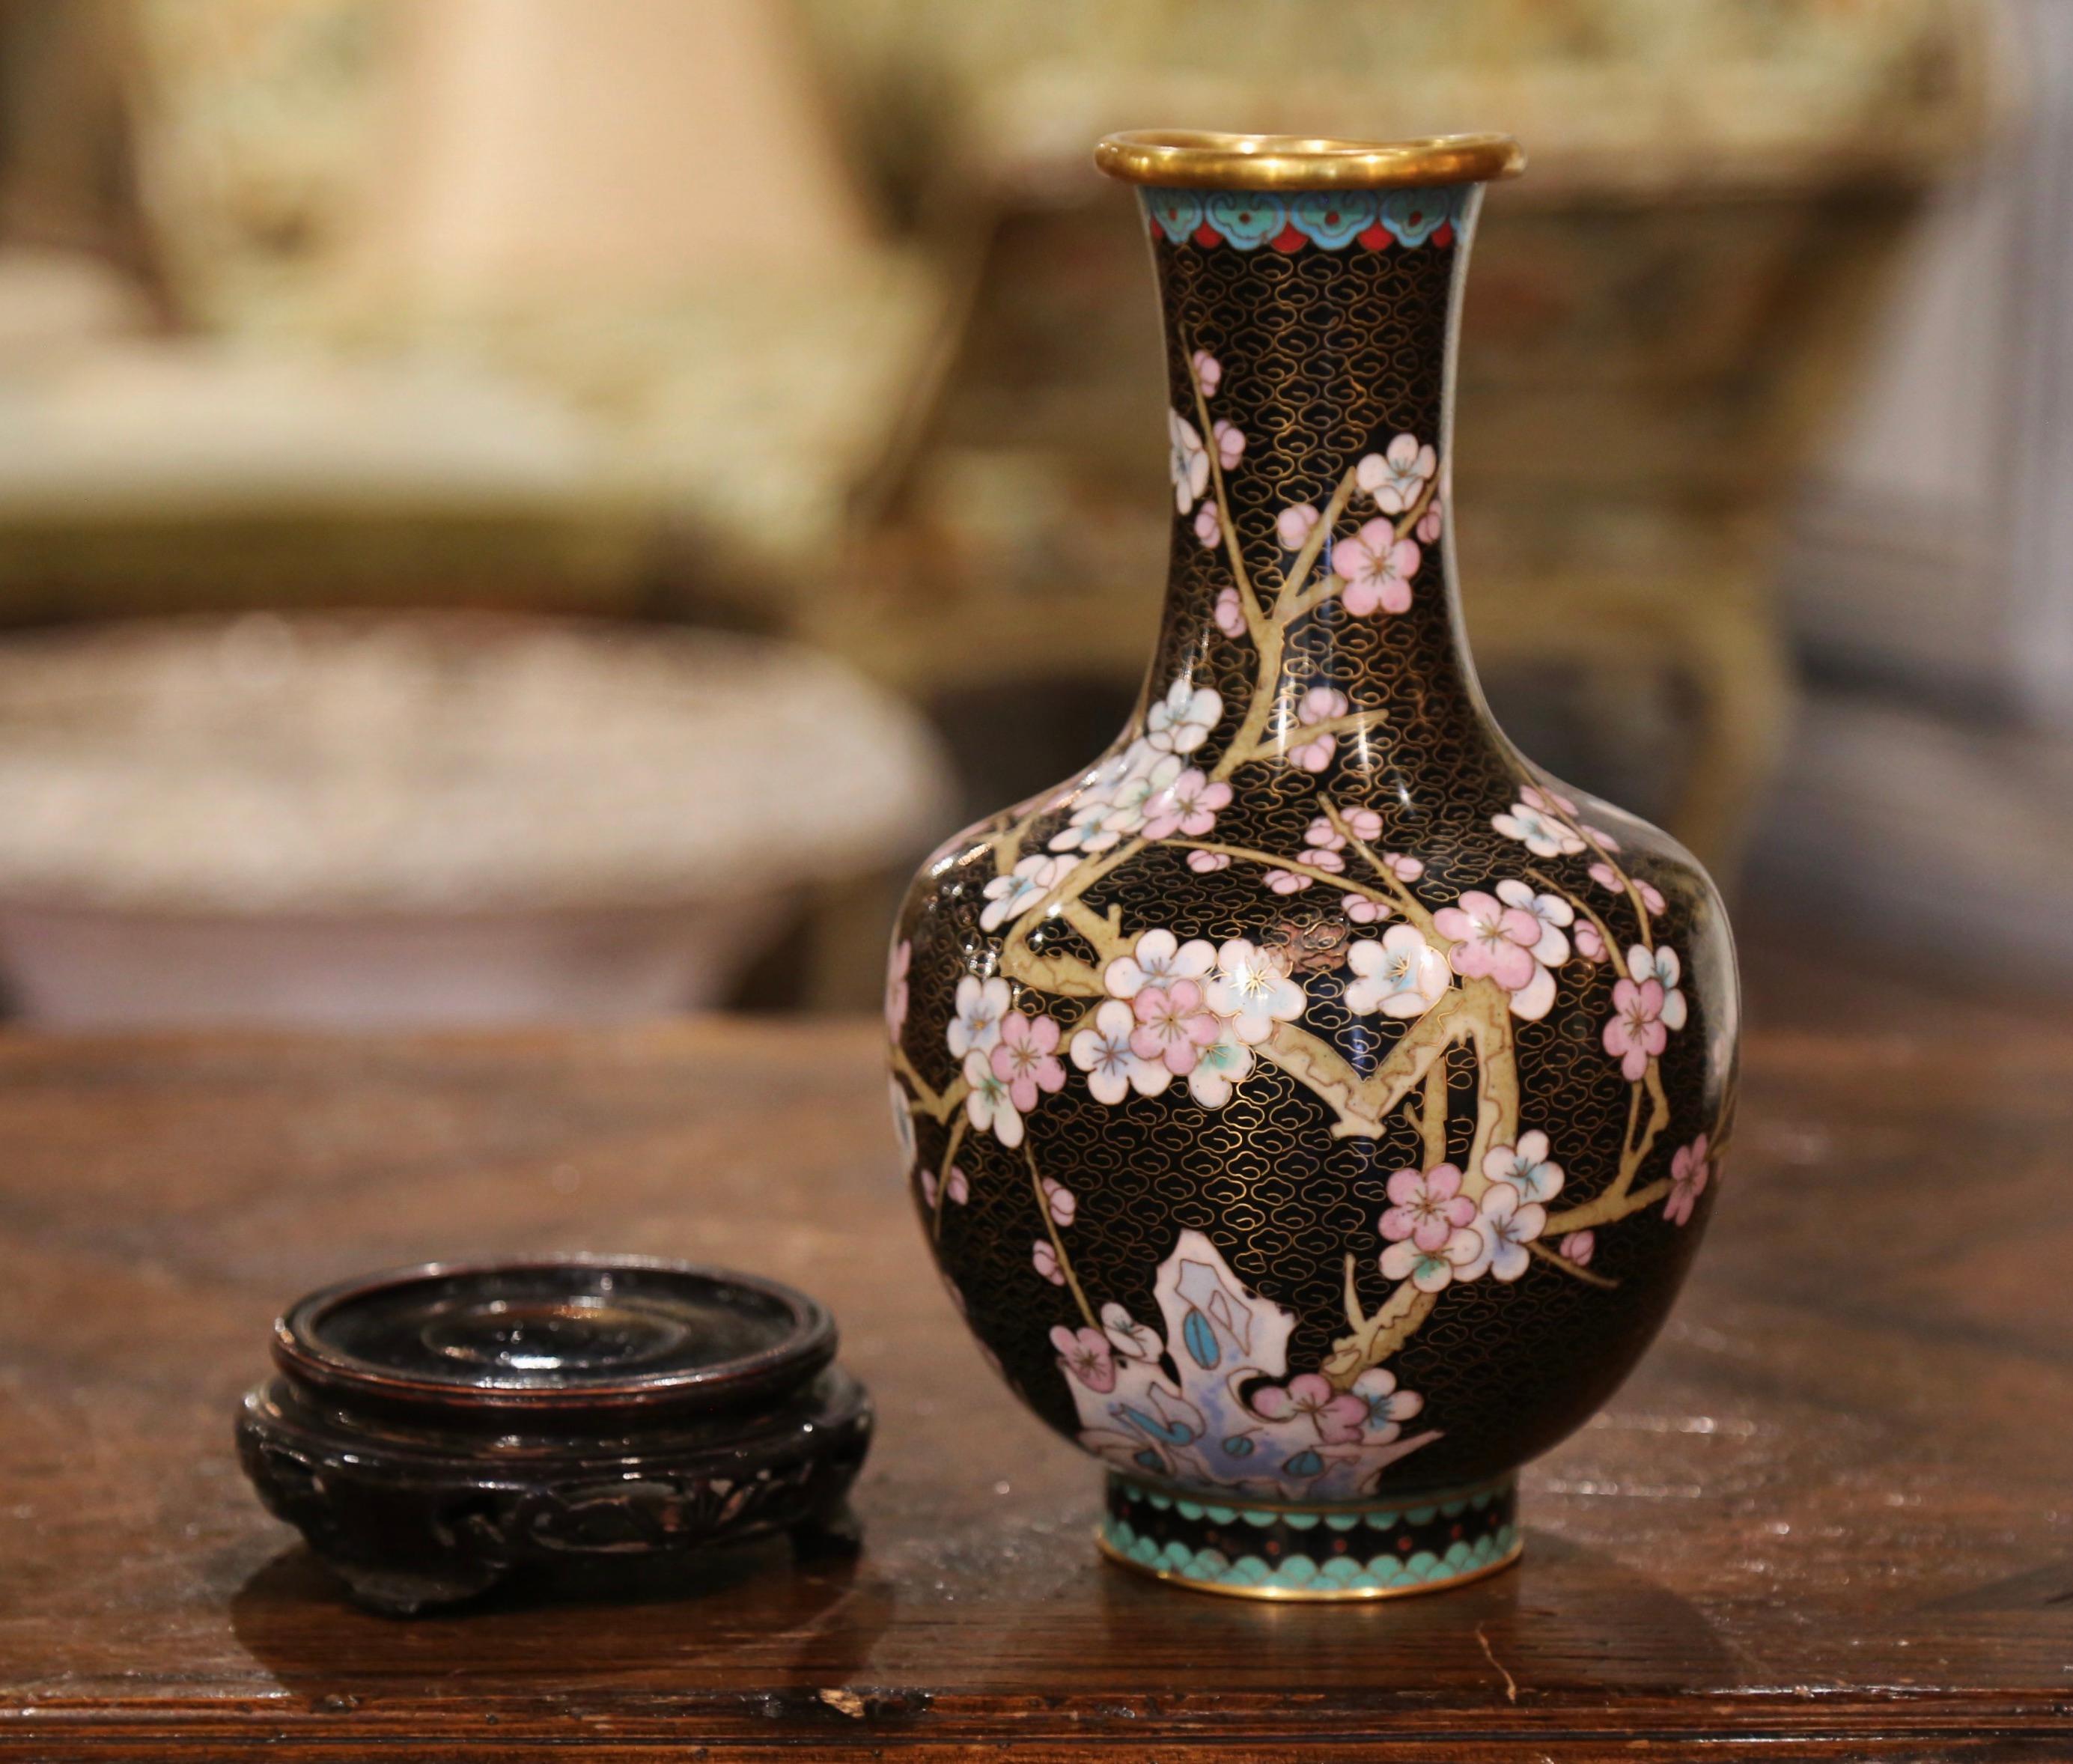 Decorate a table or a buffet with this colorful baluster vase. Created in China circa 1980, the vase sits on a carved ebonized wood stand and features floral motifs on branches in the cloisonné technique (decorative work in which enamel, glass, or